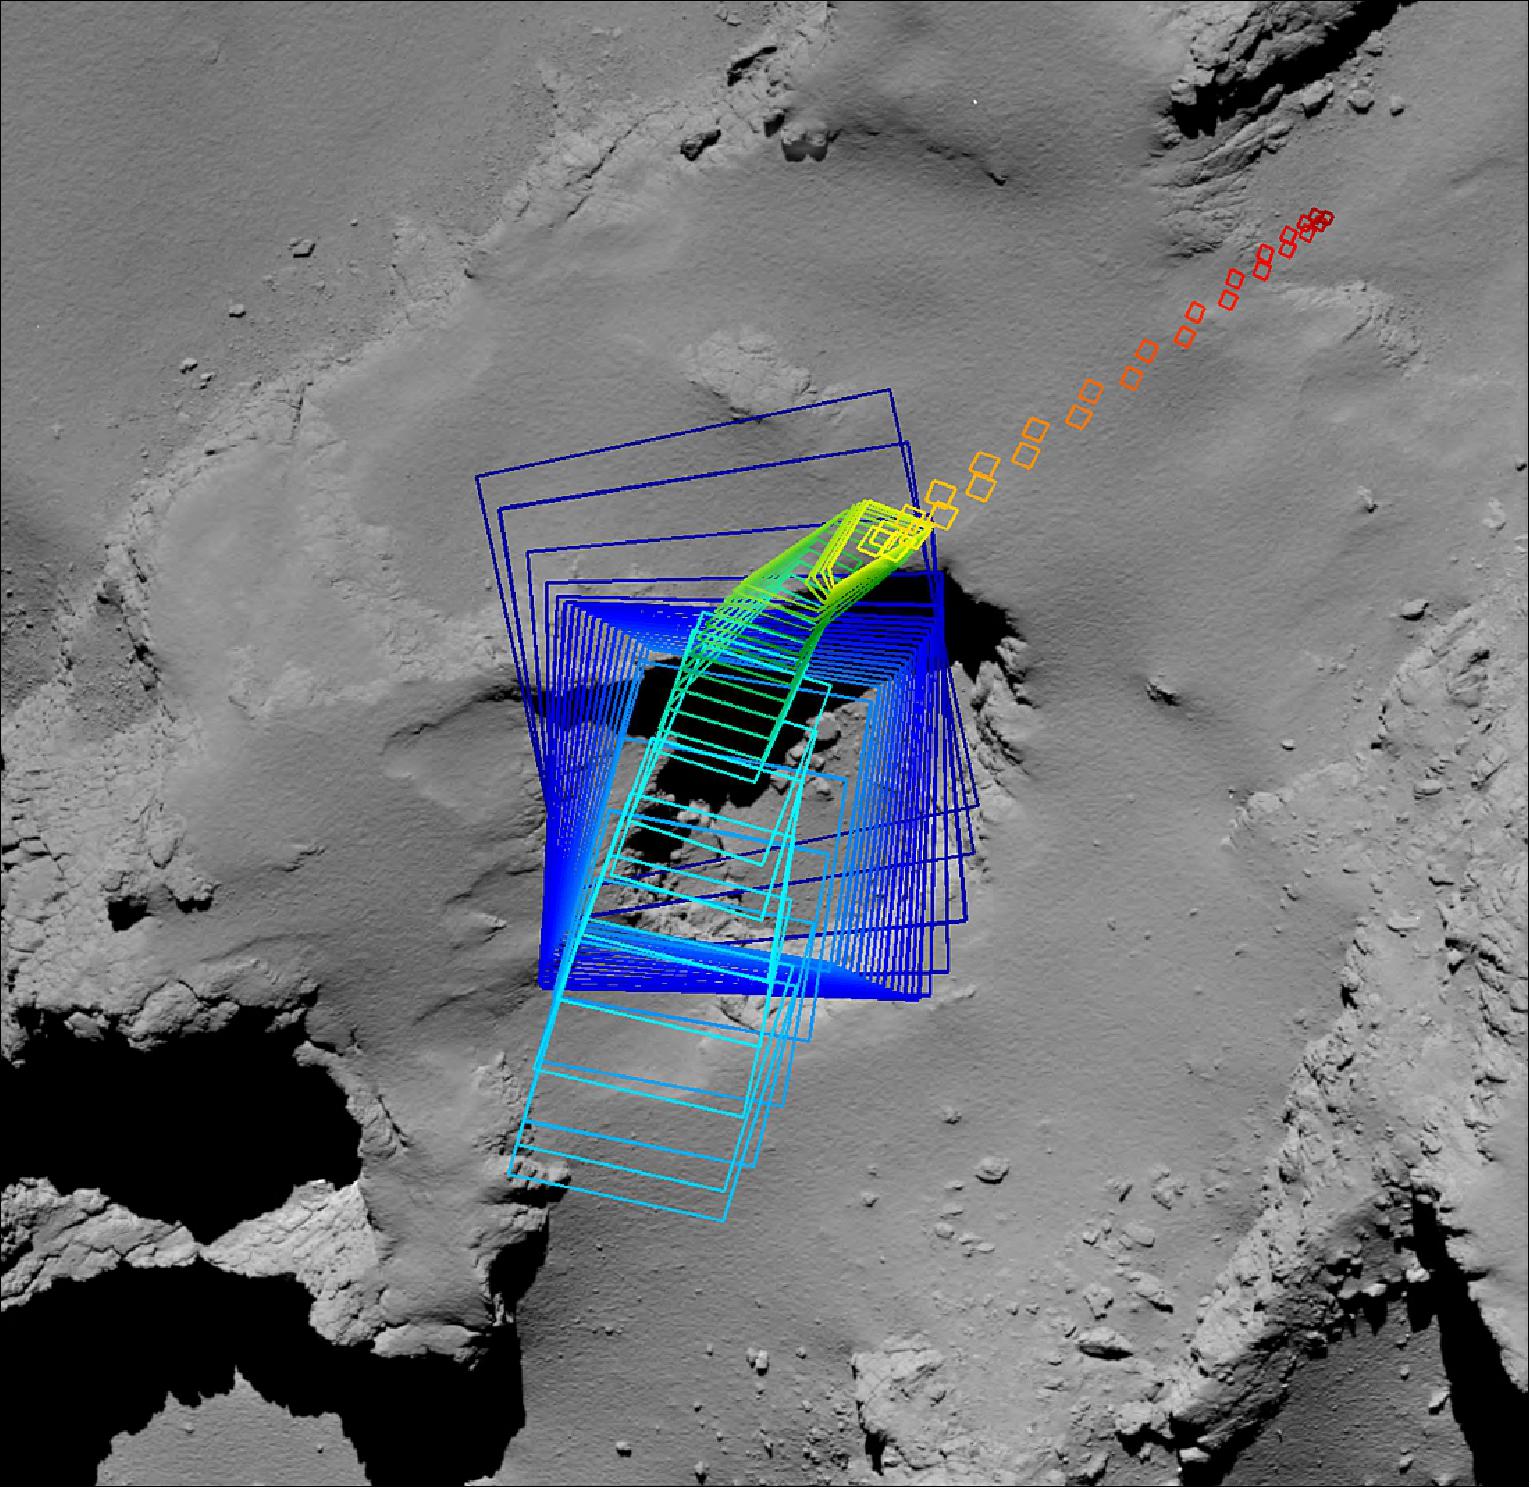 Figure 89: Imaging ‘footprints' of Rosetta's OSIRIS camera during the descent to the comet's surface. A primary focus was the pit named Deir el-Medina, as indicated by the number of footprints indicated in blue. The trail of orange and red squares reflect the change in pointing of the camera towards the impact site, subsequently named Sais. The final image was acquired at about 20 m above the surface, and the touchdown point was only 33 m from the center of the predicted landing ellipse (image credit: ESA/Rosetta/MPS for OSIRIS Team MPS/UPD/LAM/IAA/SSO/INTA/UPM/DASP/IDA)